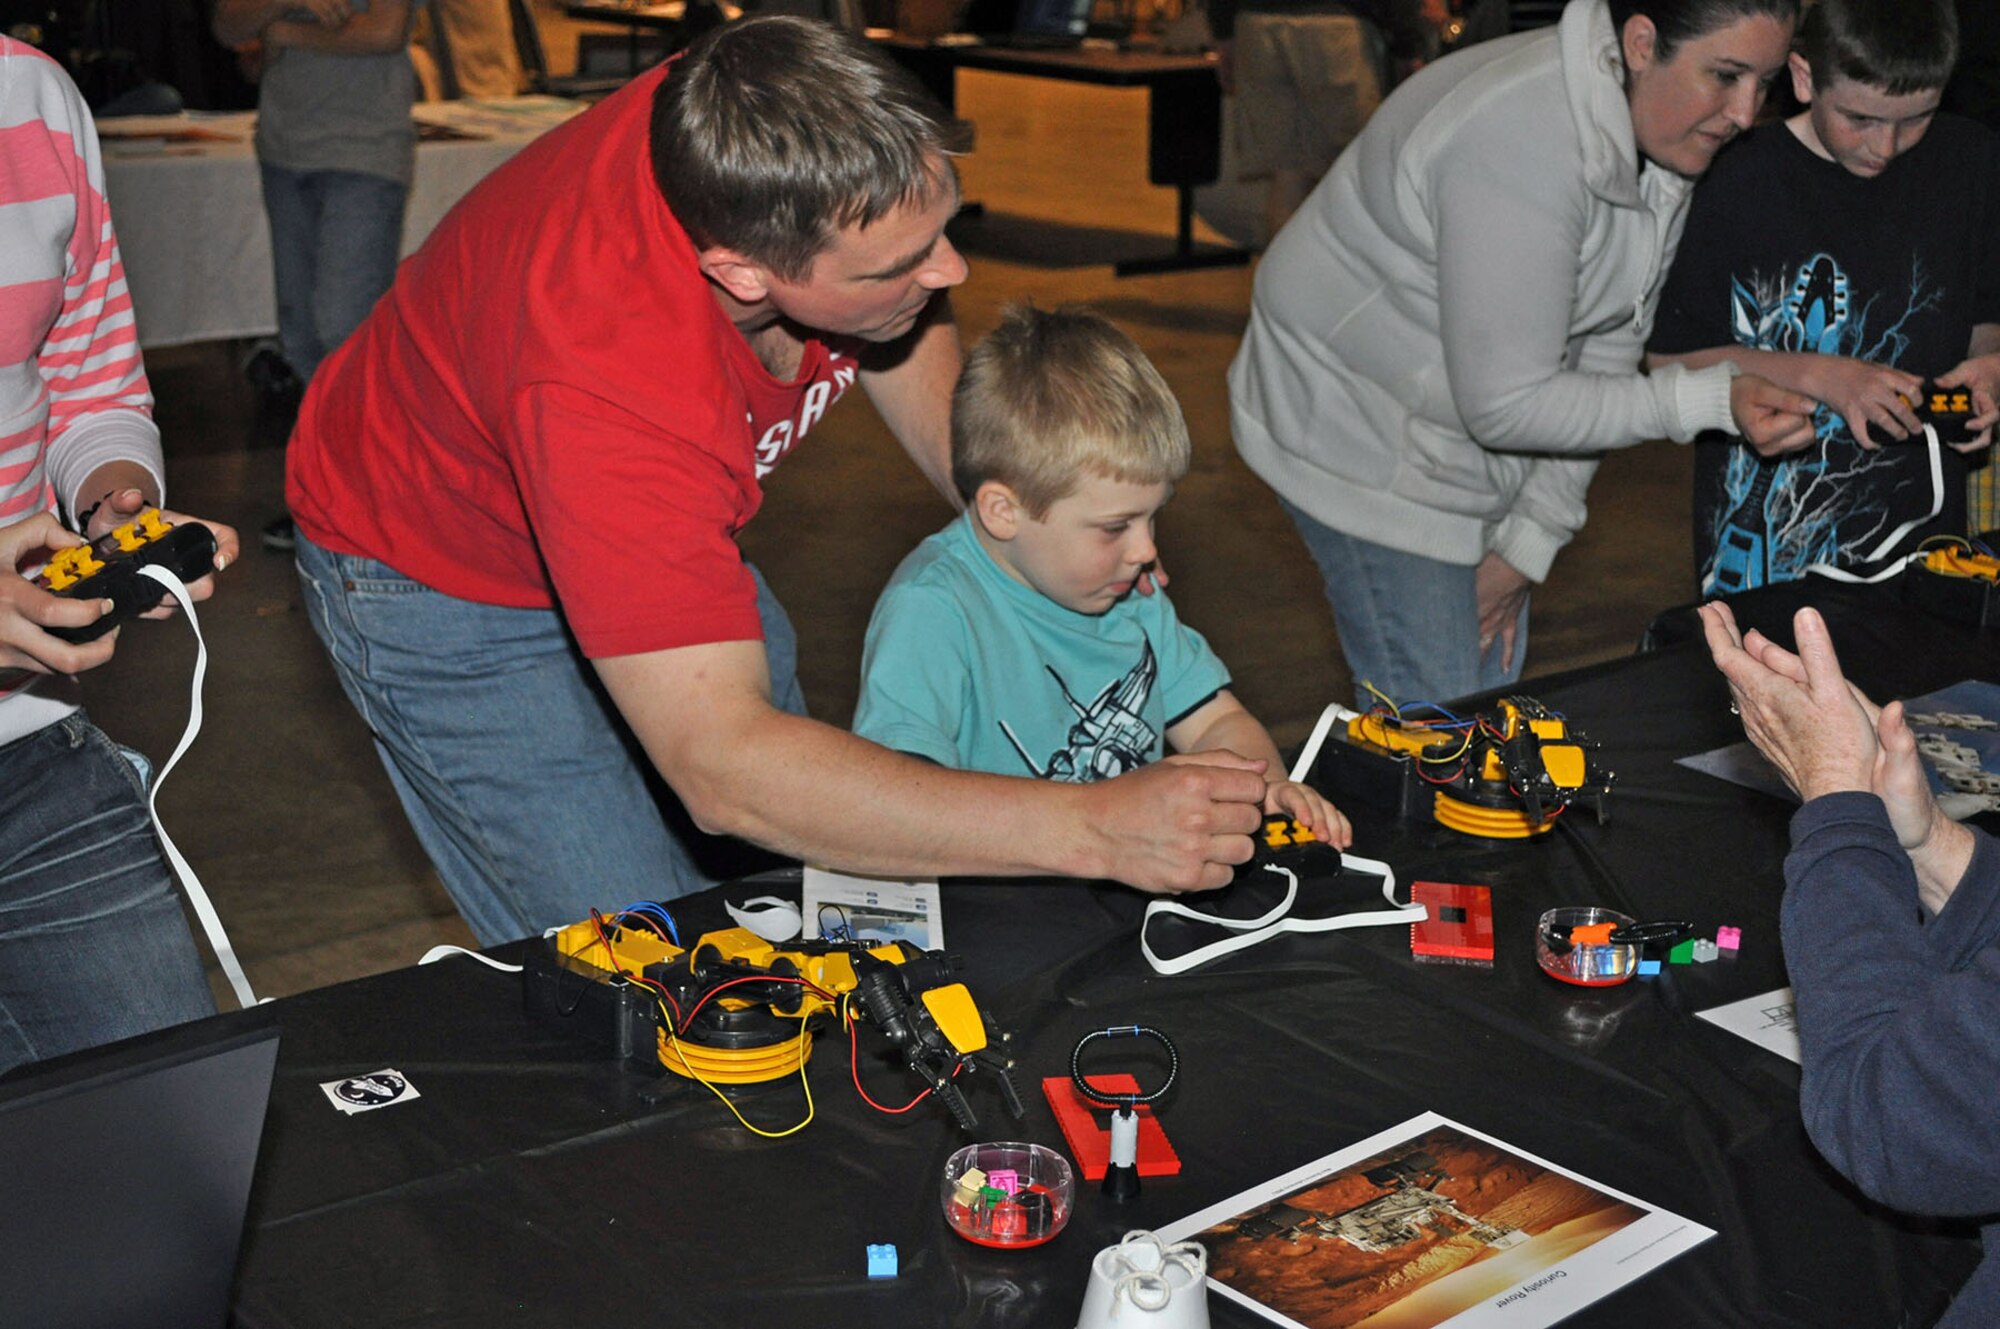 DAYTON, Ohio (05/2013) -- Participants enjoyed a number of hands-on activities during Space Fest on May 4 at the National Museum of the U.S. Air Force. (U.S. Air Force photo by Garry Guthrie)